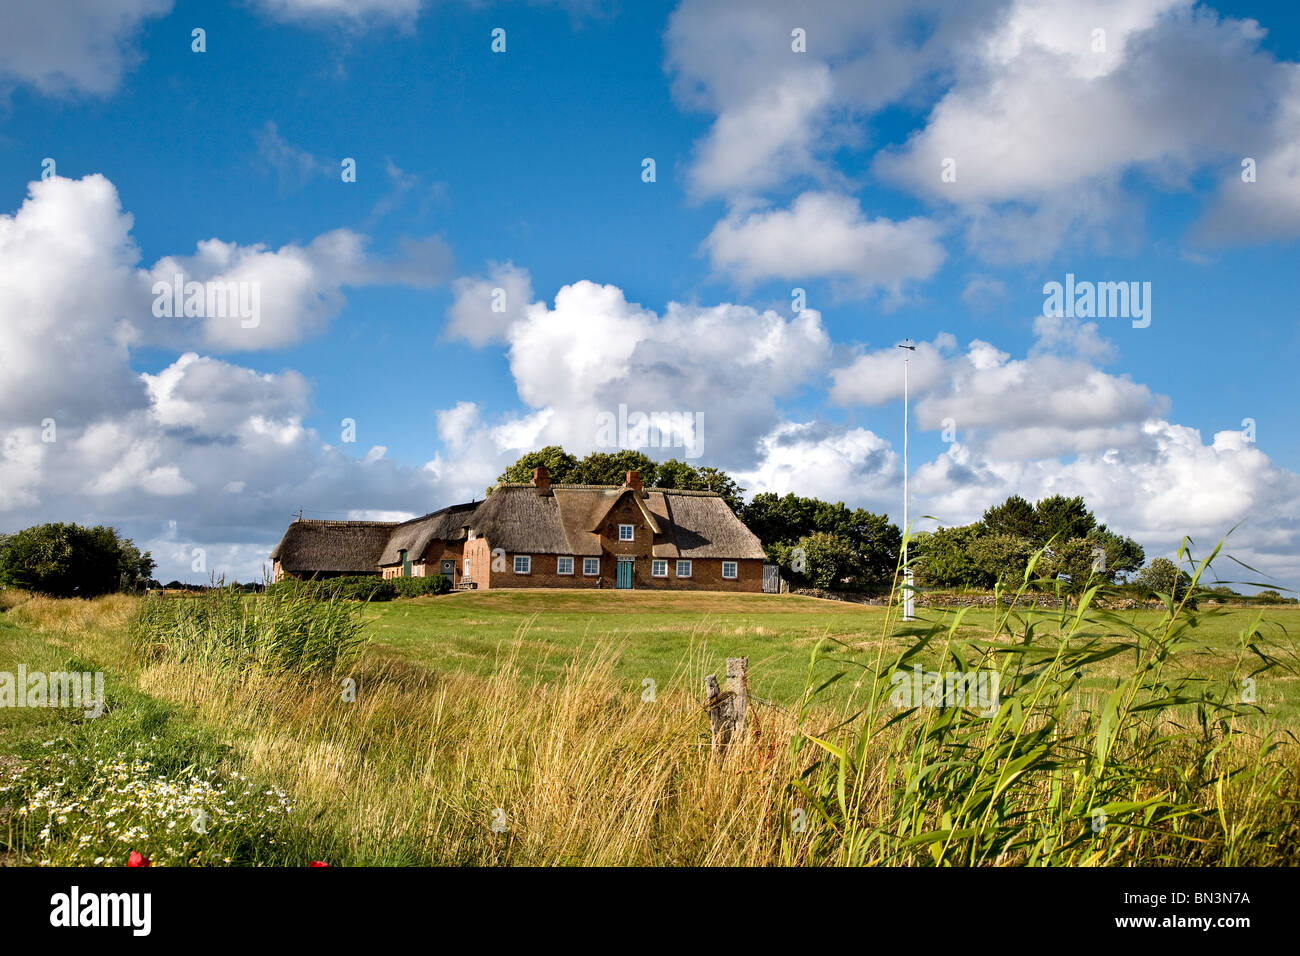 Thatched-roof house in Morsum, Sylt, Germany Stock Photo